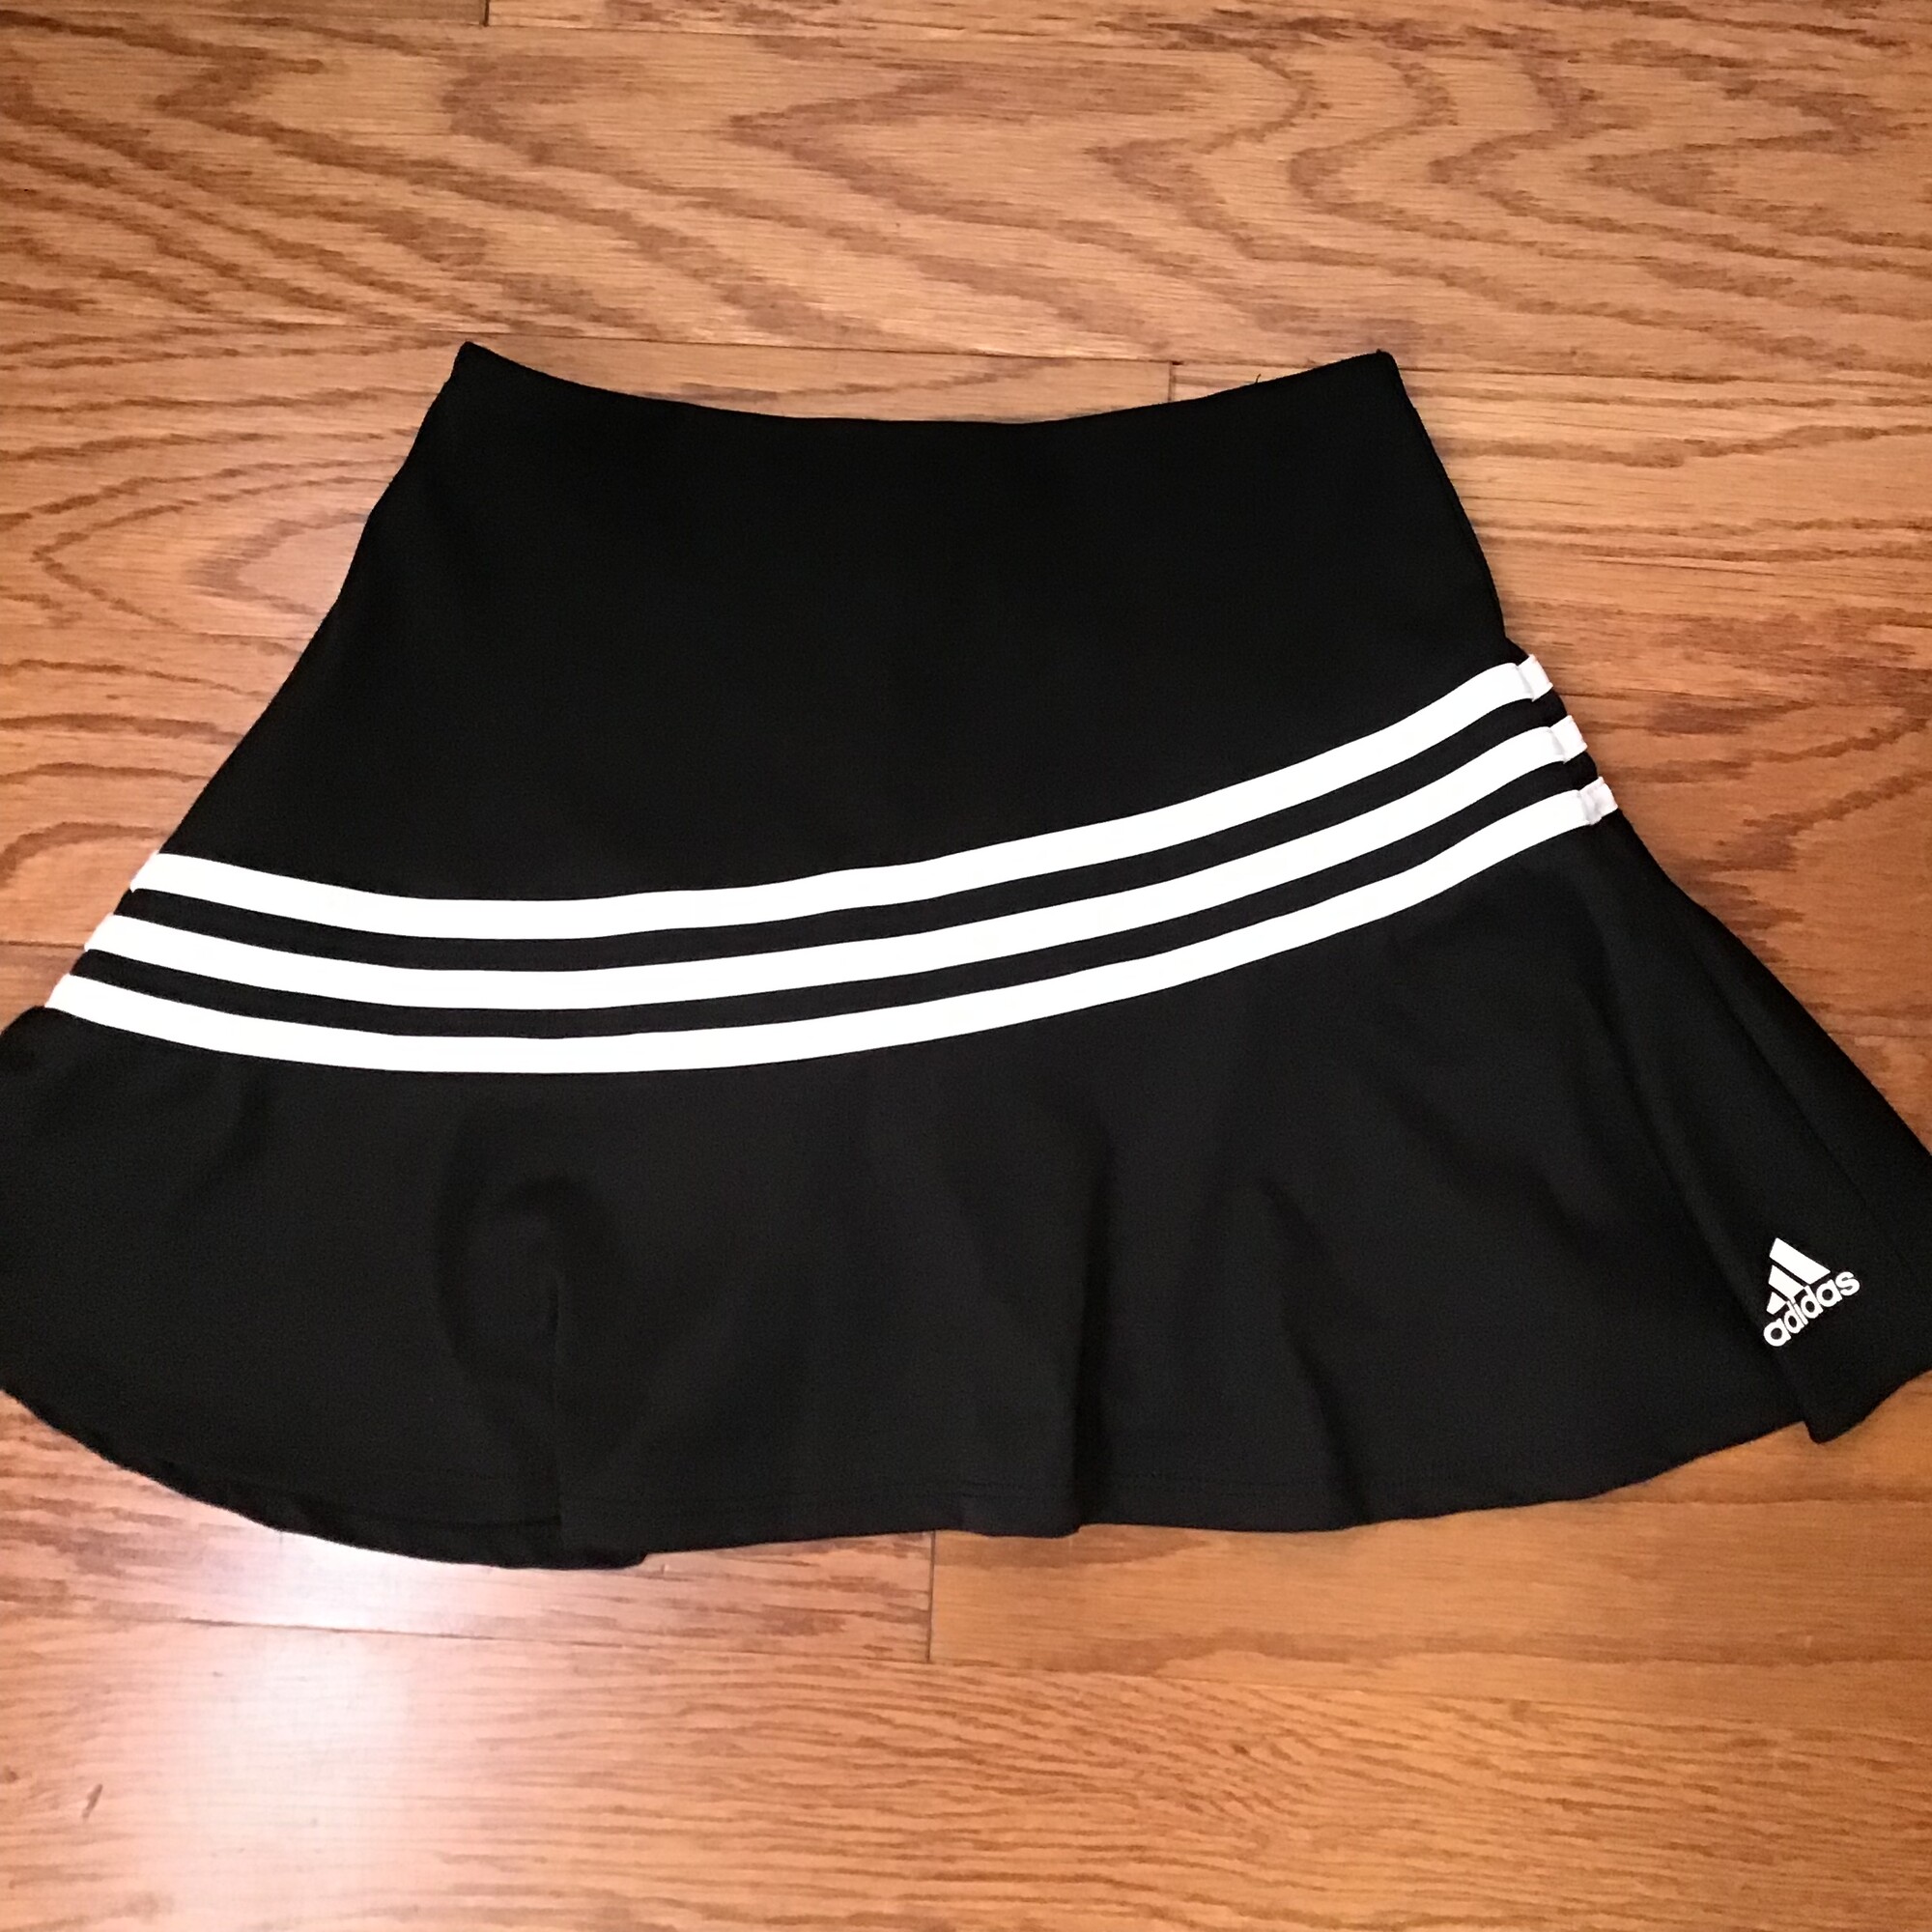 Adidas Skort, Black, Size: 10-12

ALL ONLINE SALES ARE FINAL.
NO RETURNS
REFUNDS
OR EXCHANGES

PLEASE ALLOW AT LEAST 1 WEEK FOR SHIPMENT. THANK YOU FOR SHOPPING SMALL!